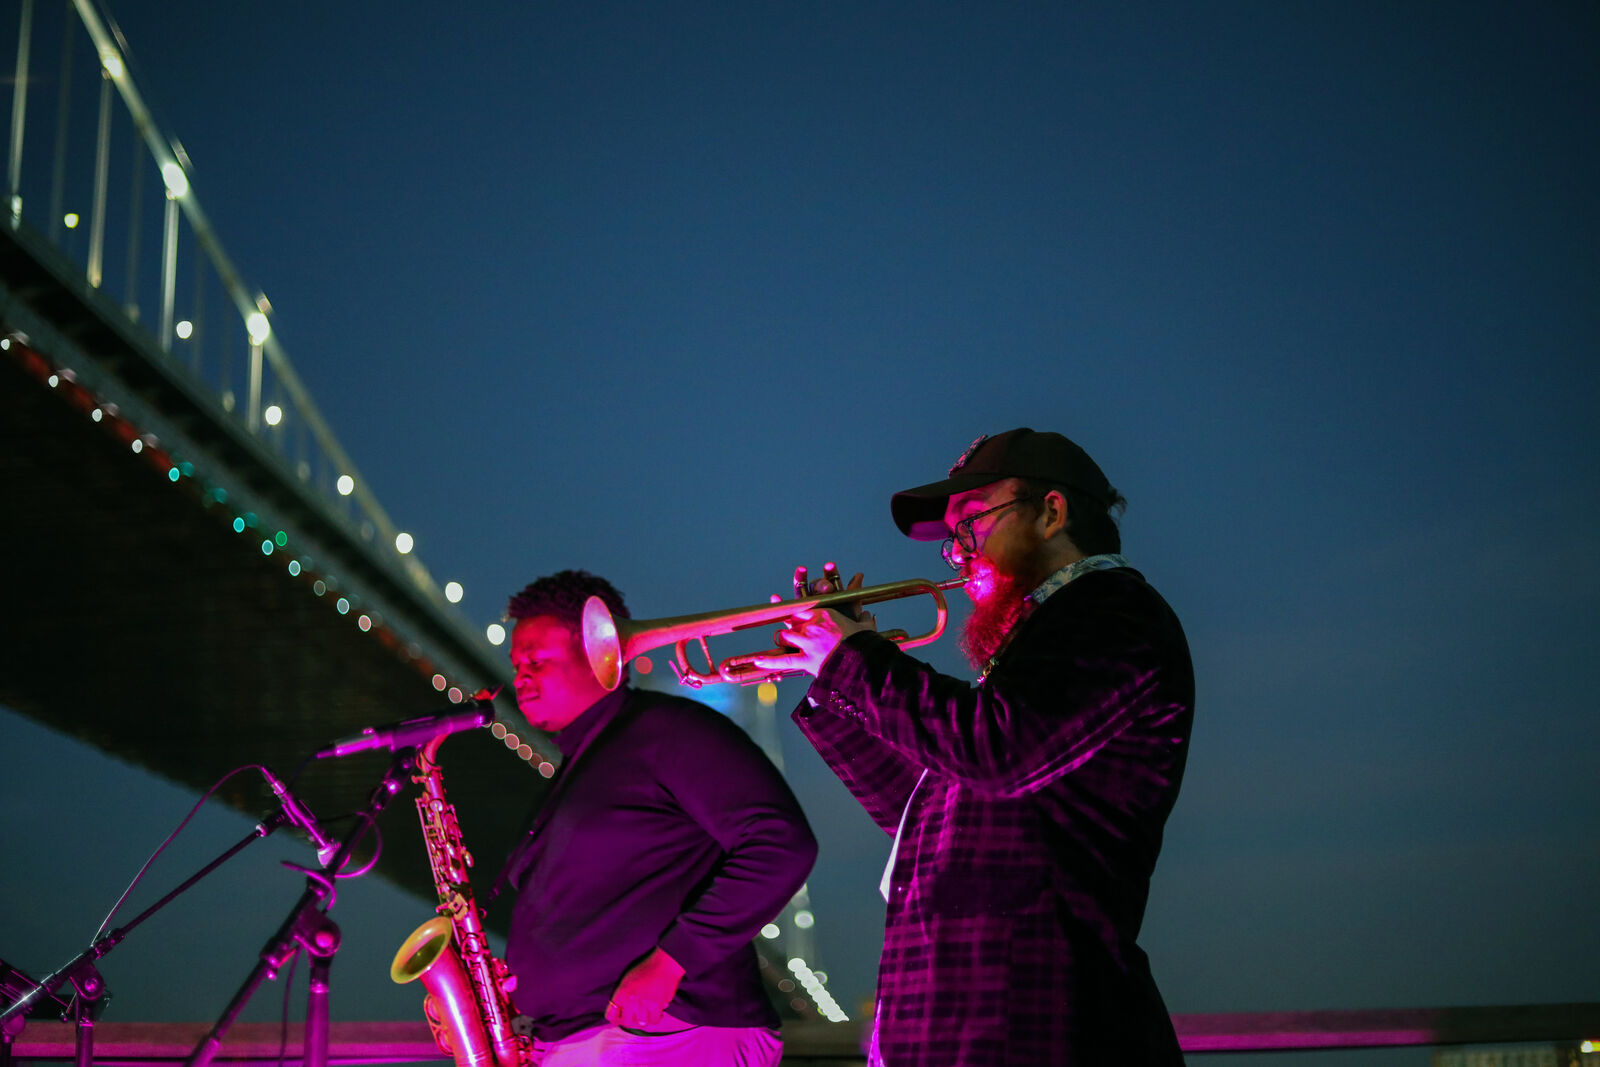 man plays trumpet and second man plays saxophone lit by red light at night in front of a bridge